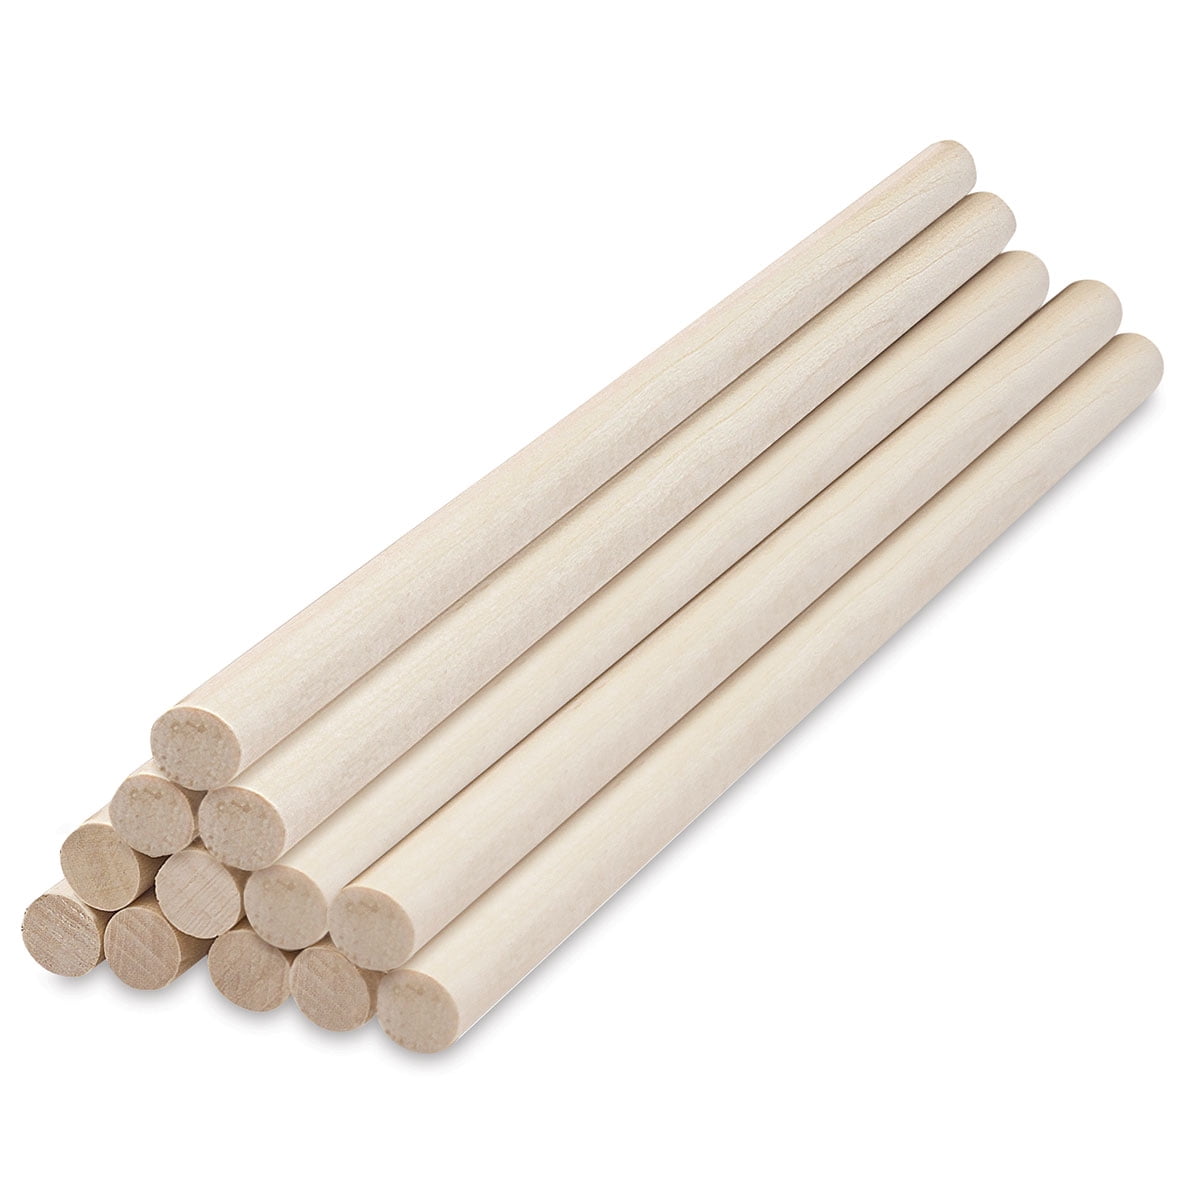 homemade counting stick Wooden diy craft Educational Toys Round Wooden Rods 